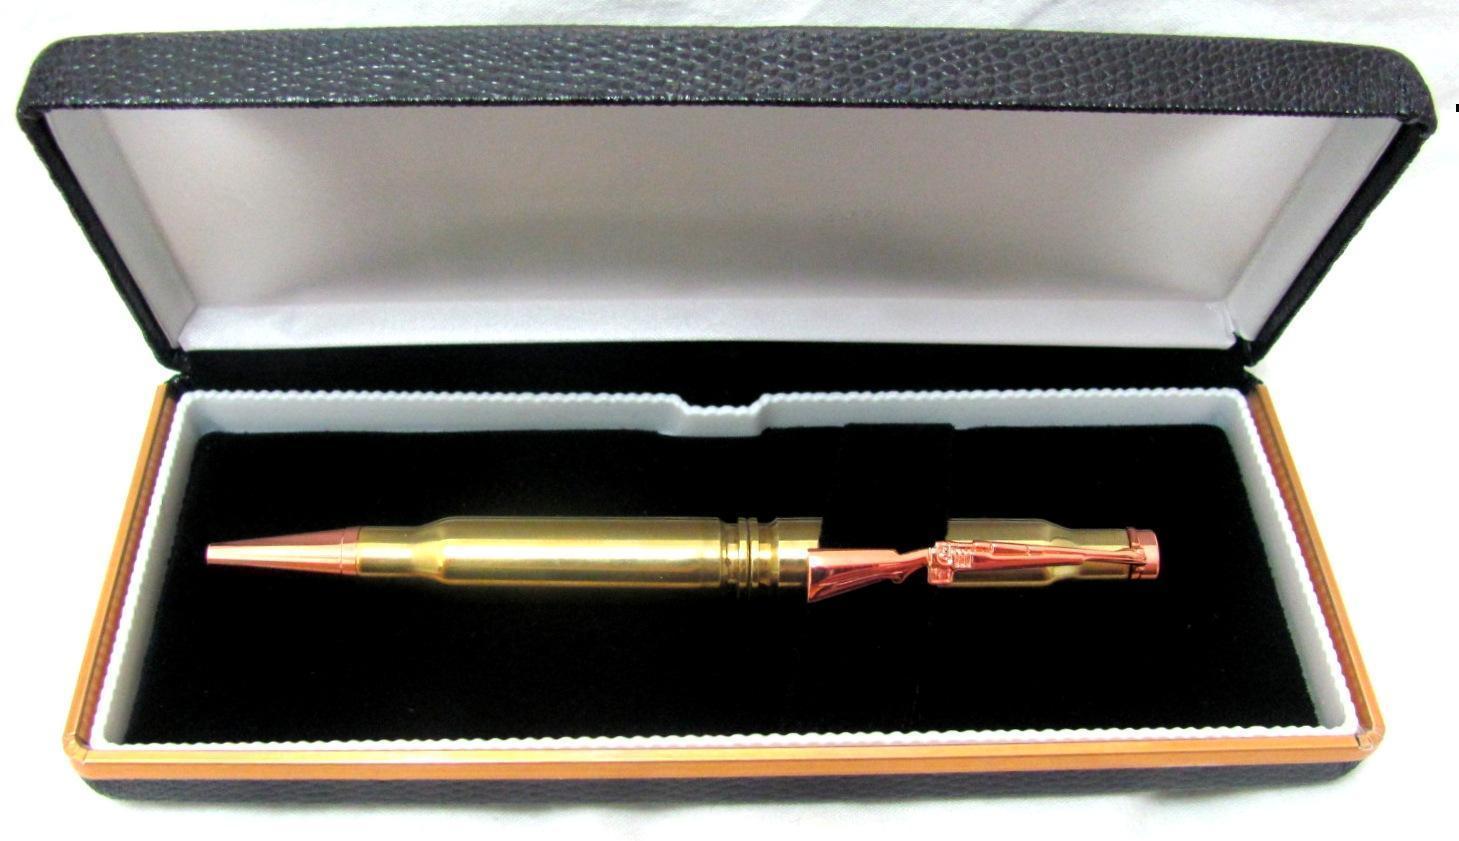 Aussie Bullet Digger Pen in Gift Box - Made with Real .308 Rifle Bullet Shells